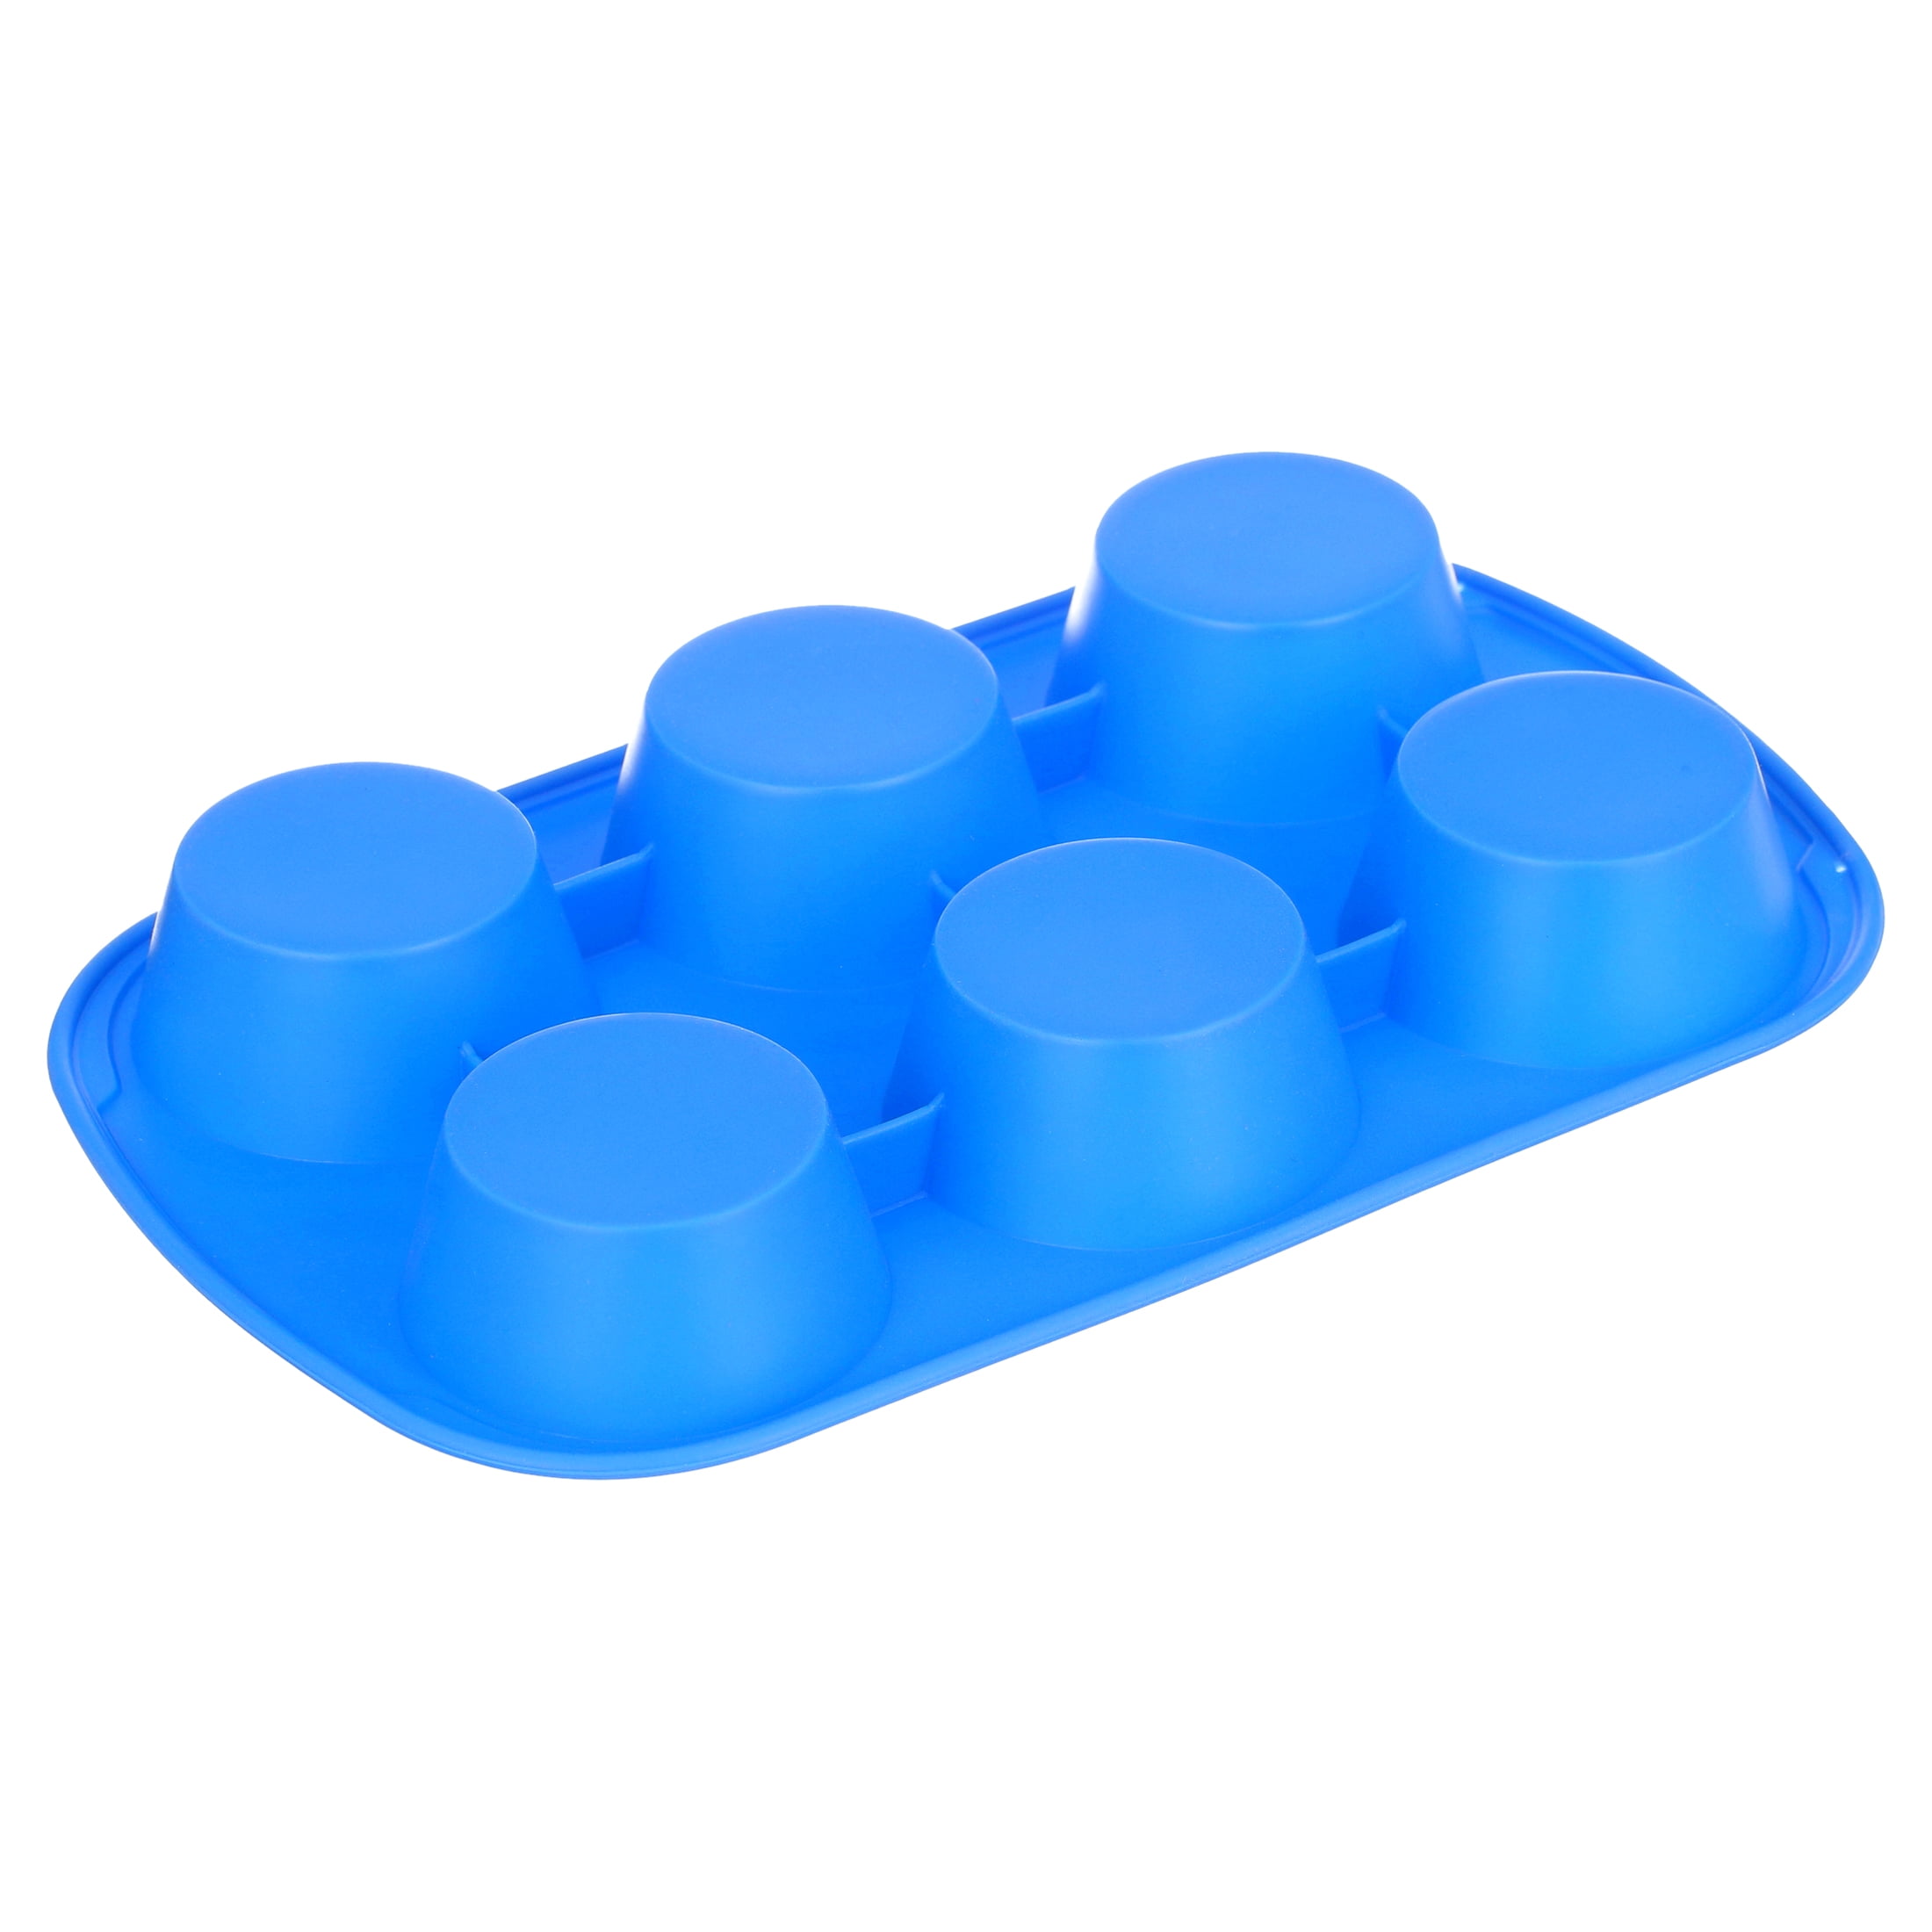 SILICONE MUFFIN PAN 6 CUP - Big Plate Restaurant Supply